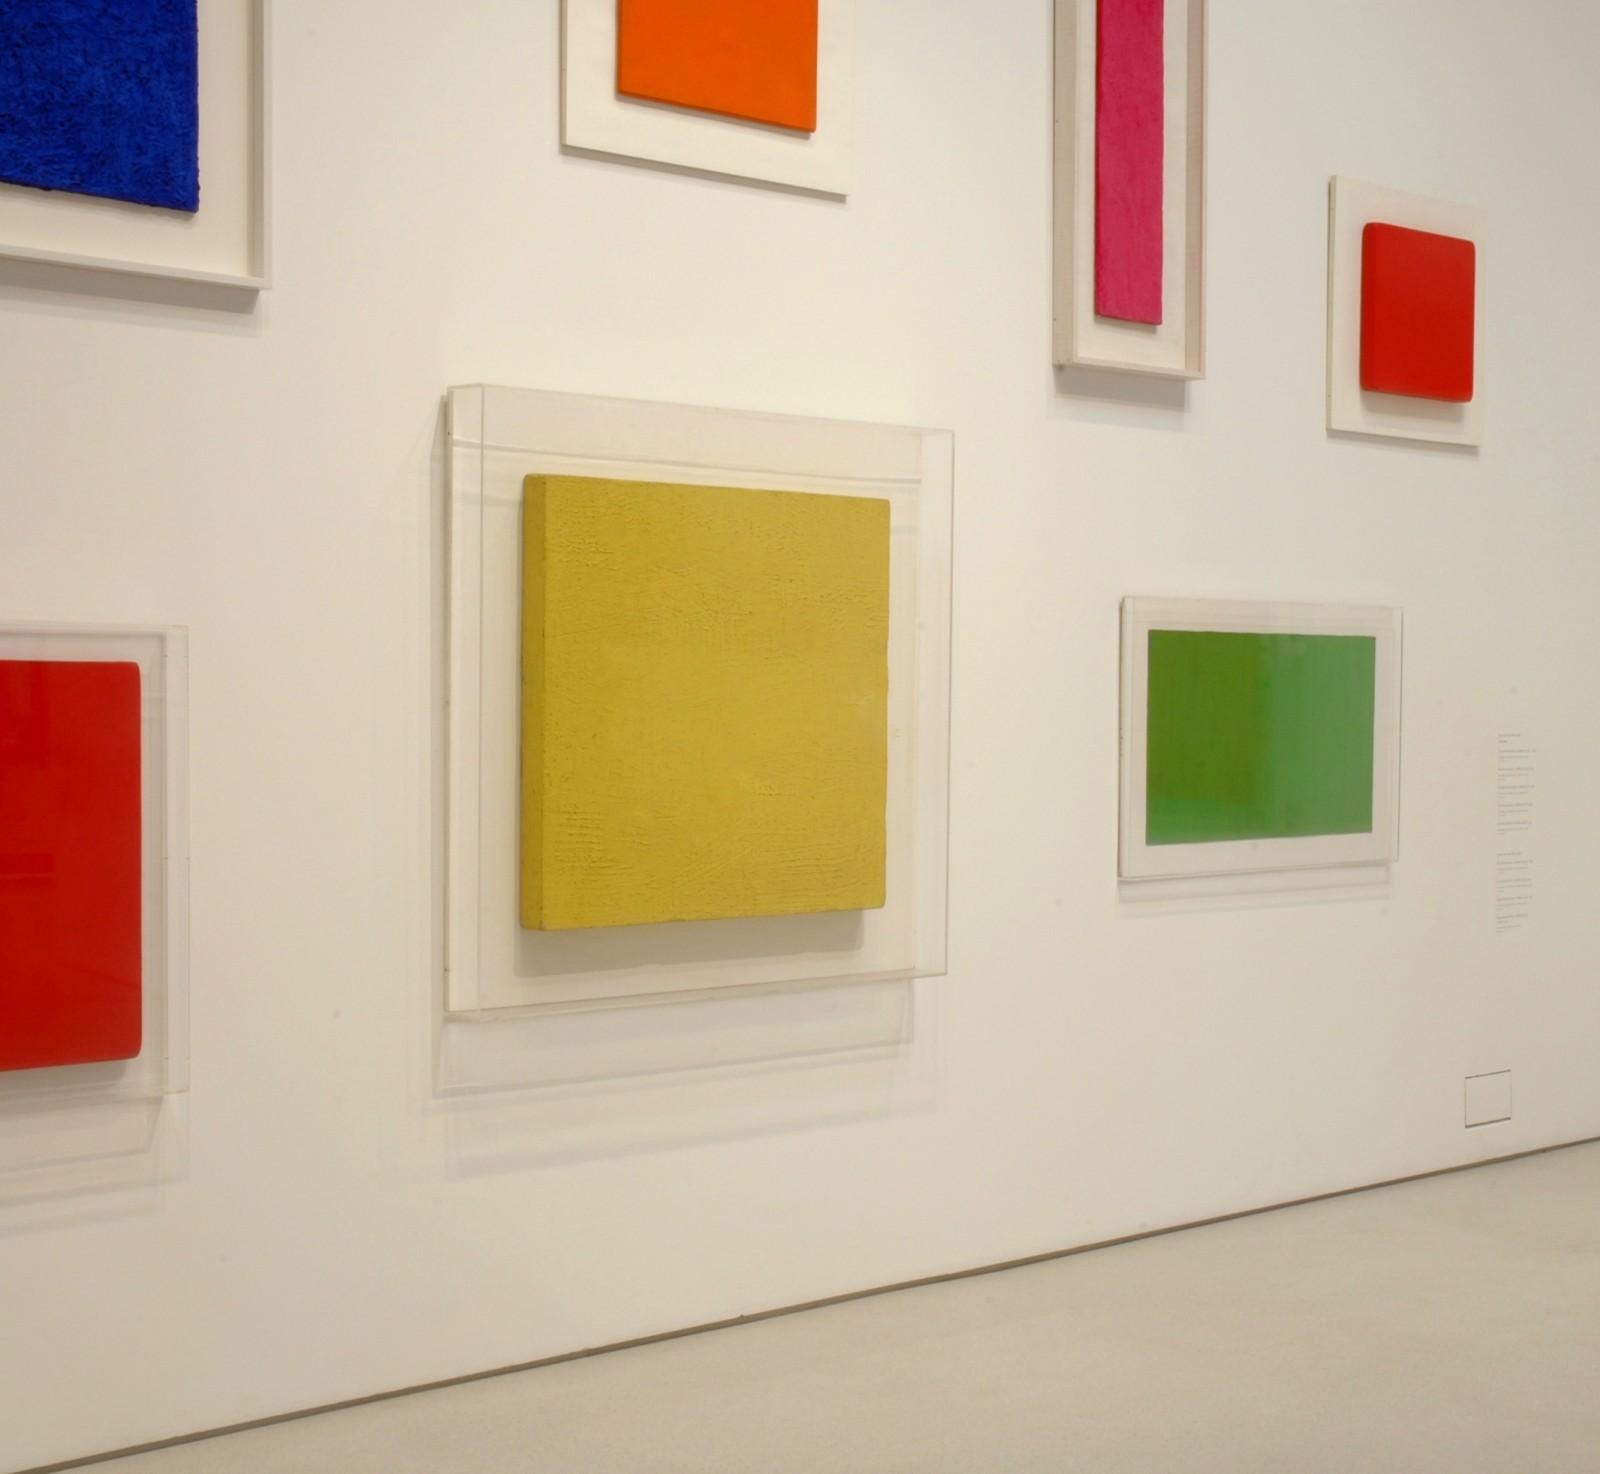 View of the exhibition, "Colour after Klein", Barbican Art Gallery, 2005